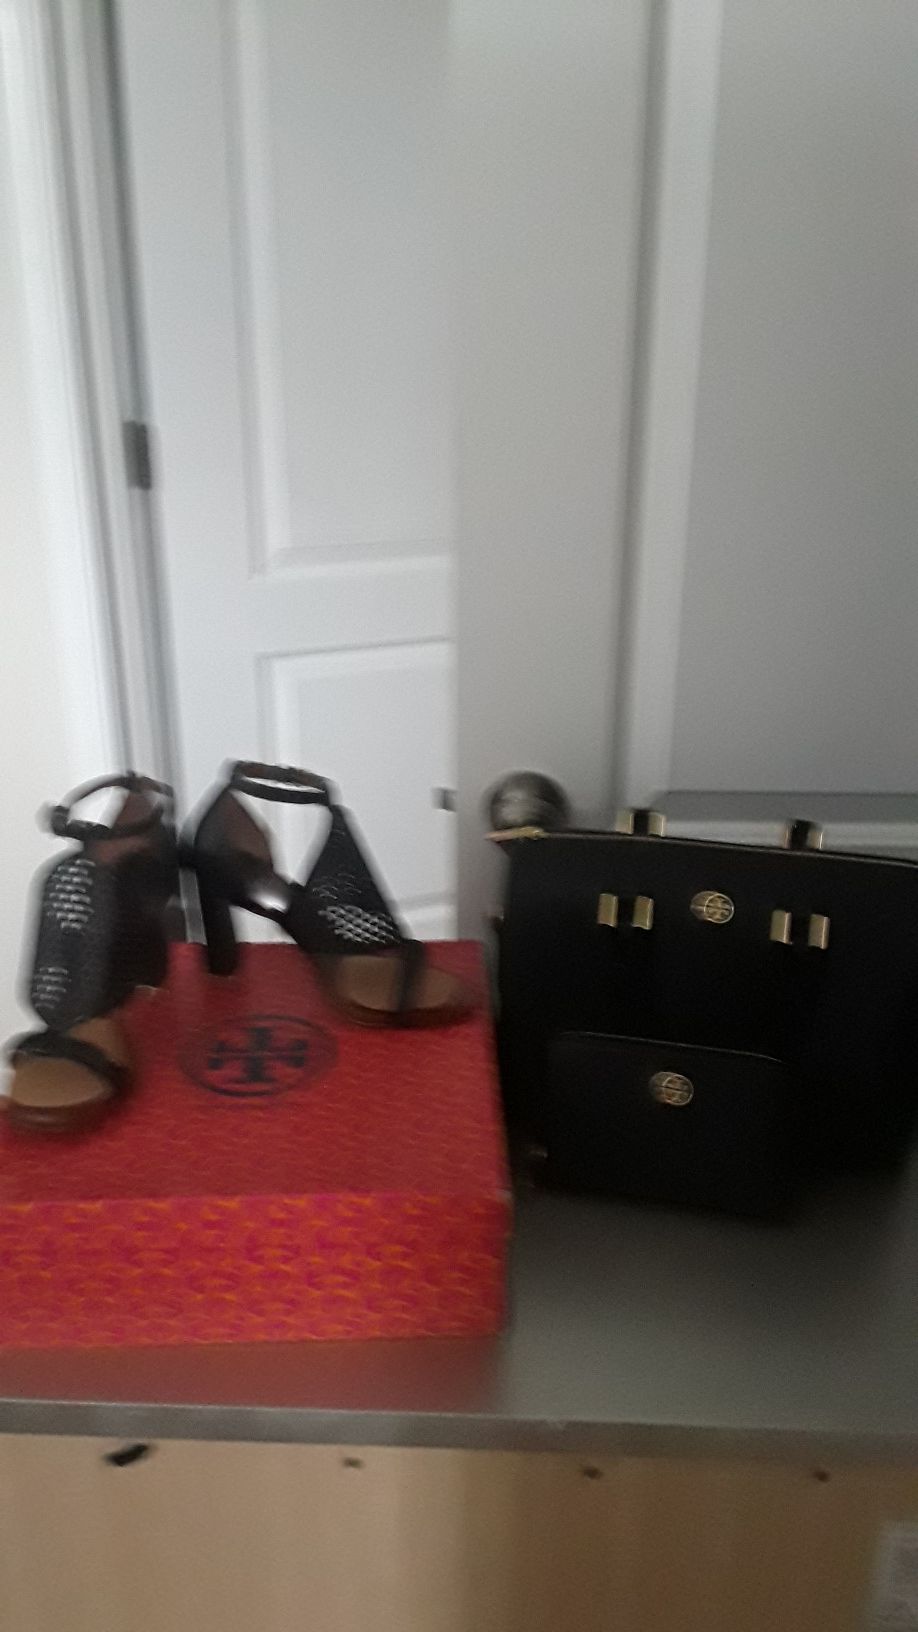 Purse and wallet new Tory Burch shoes size 7